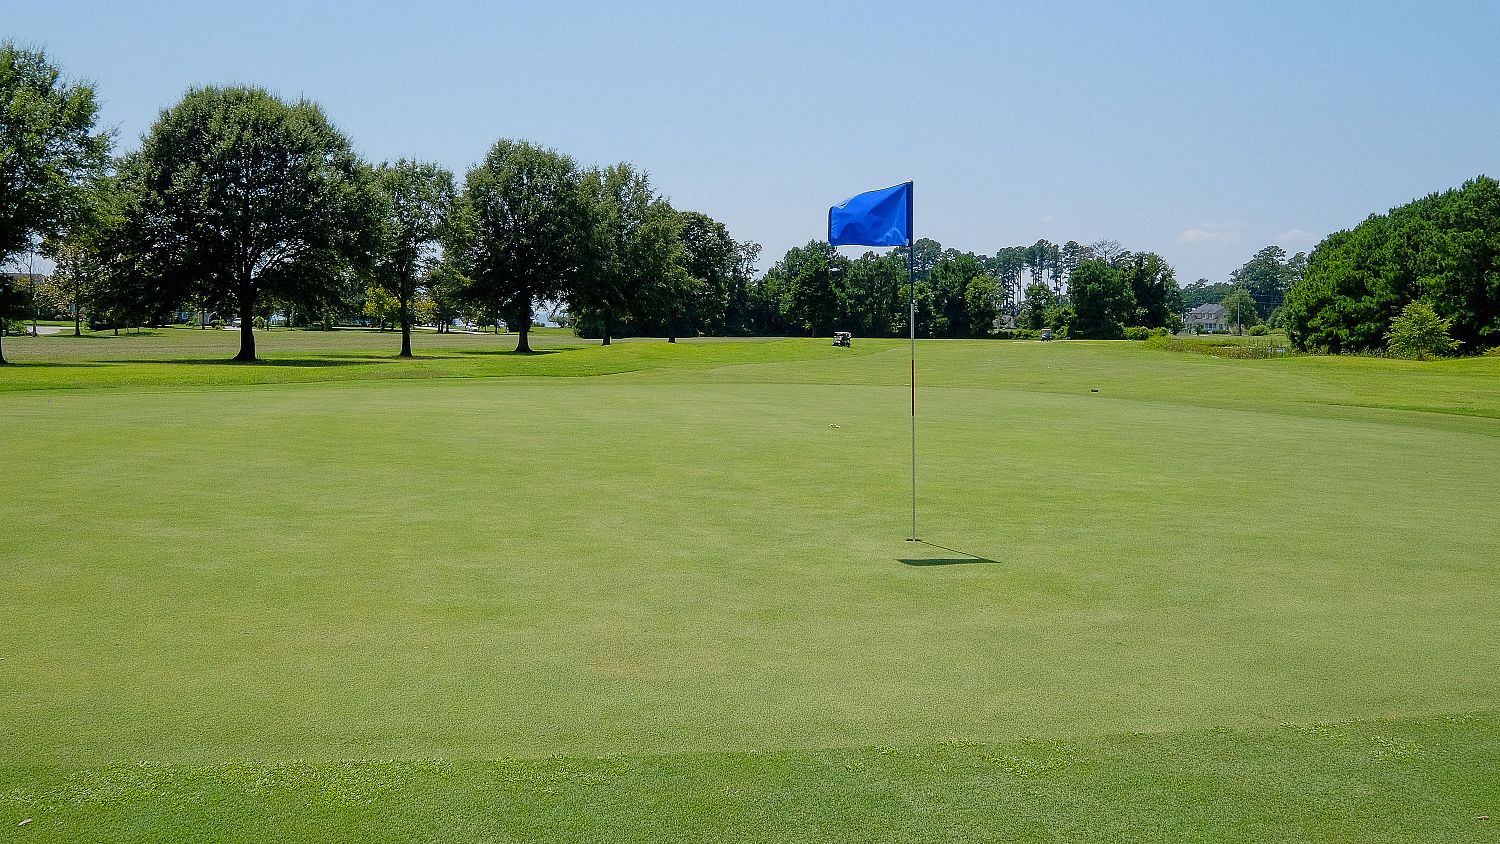 One of the beautifully manicured greens at the Links at Mulberry Hill